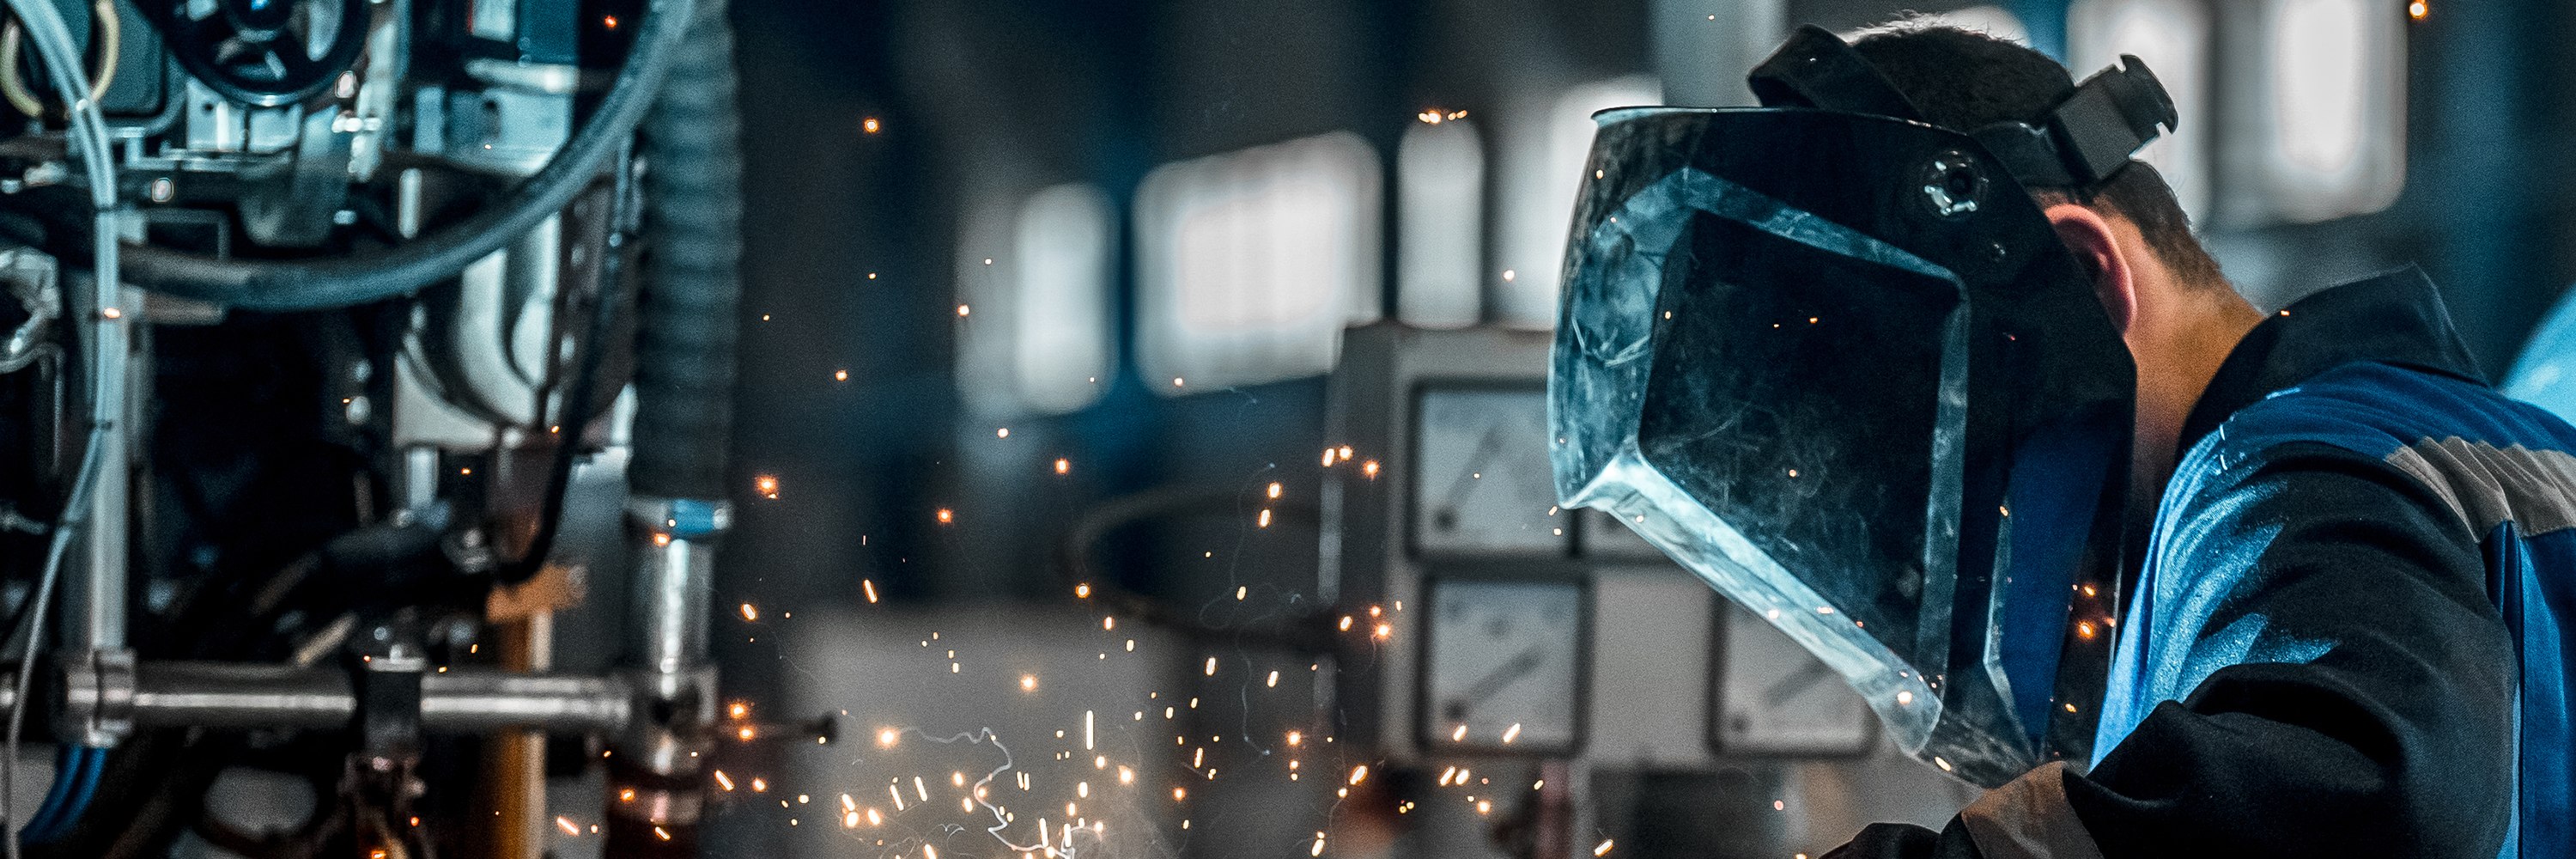 Welder wearing a blue protective face mask with sparks and machinery